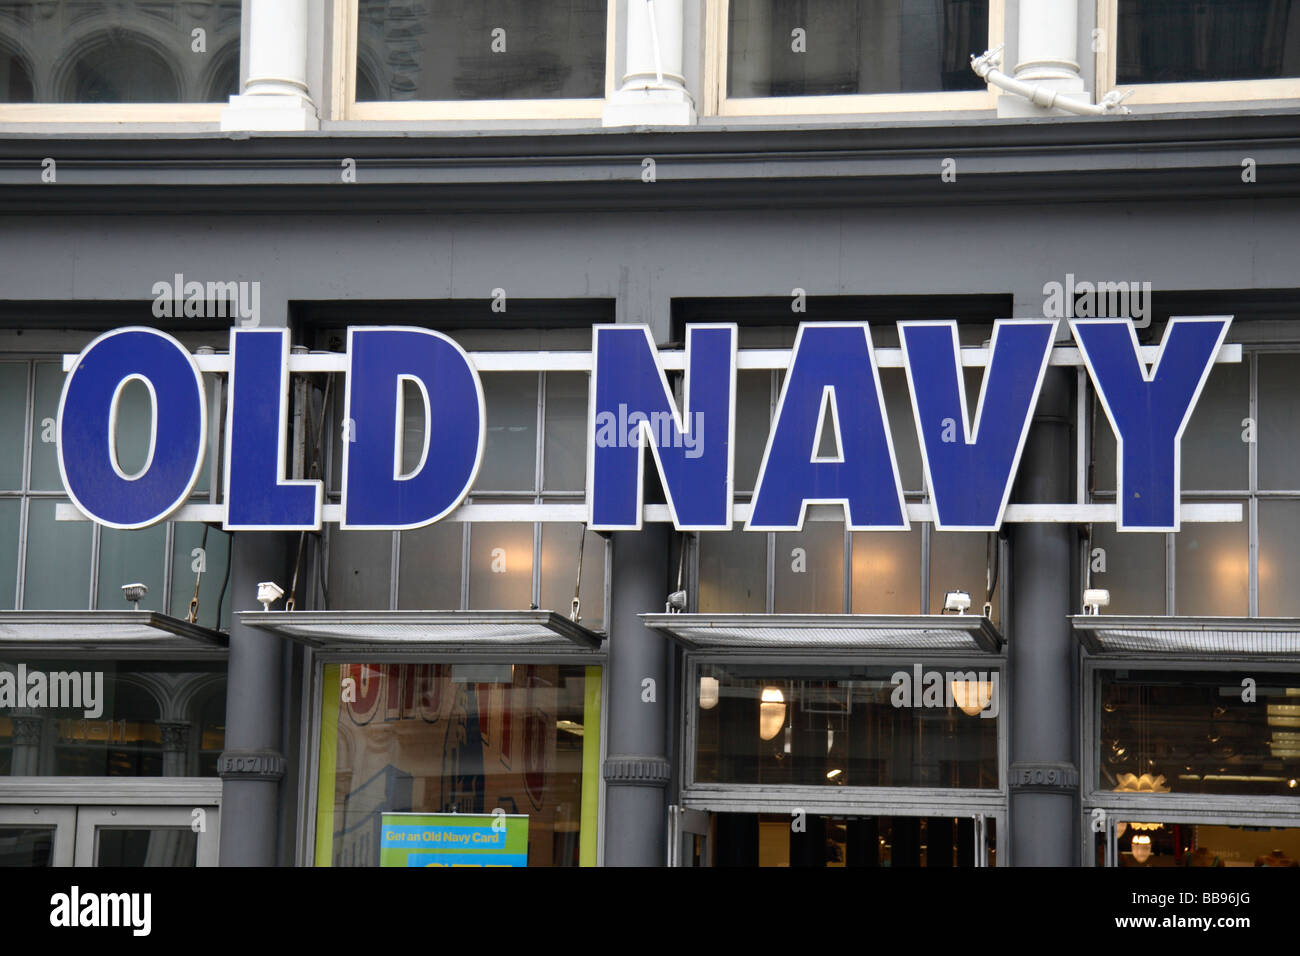 The 'Old Navy' sign above a store in Manhatten, New York. Stock Photo